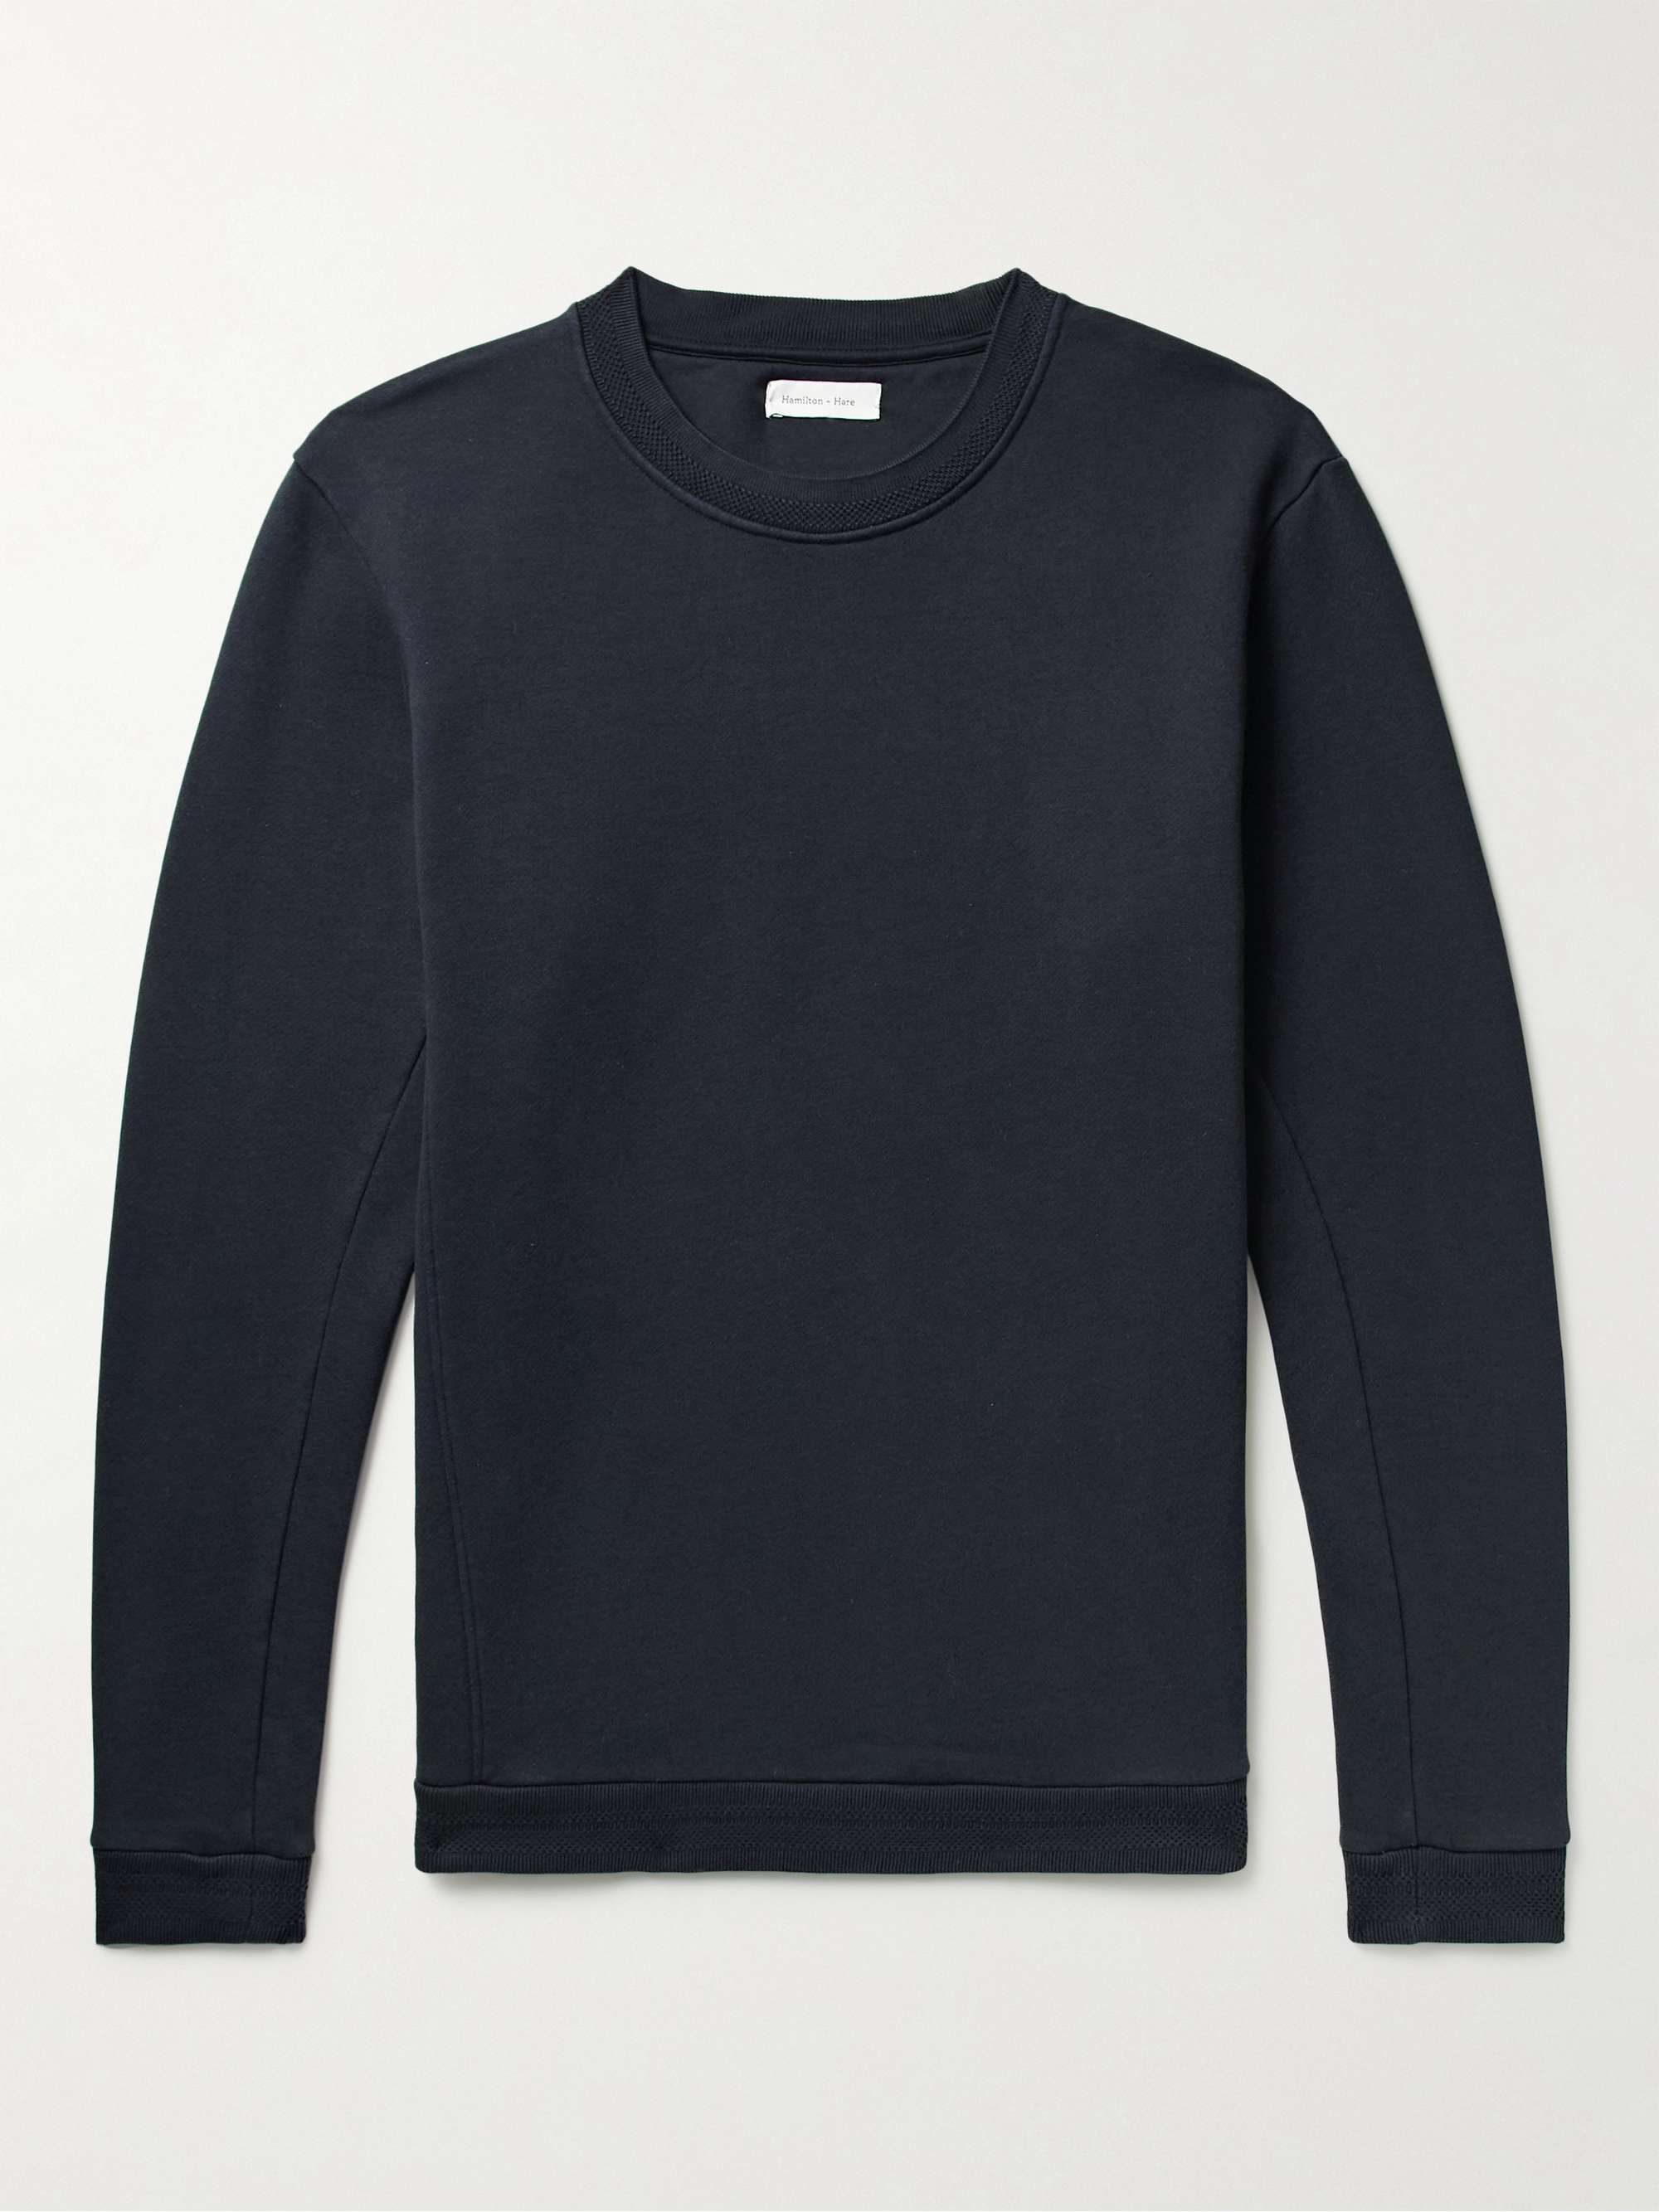 HAMILTON AND HARE Cotton and Lyocell-Blend Jersey Sweatshirt for Men ...